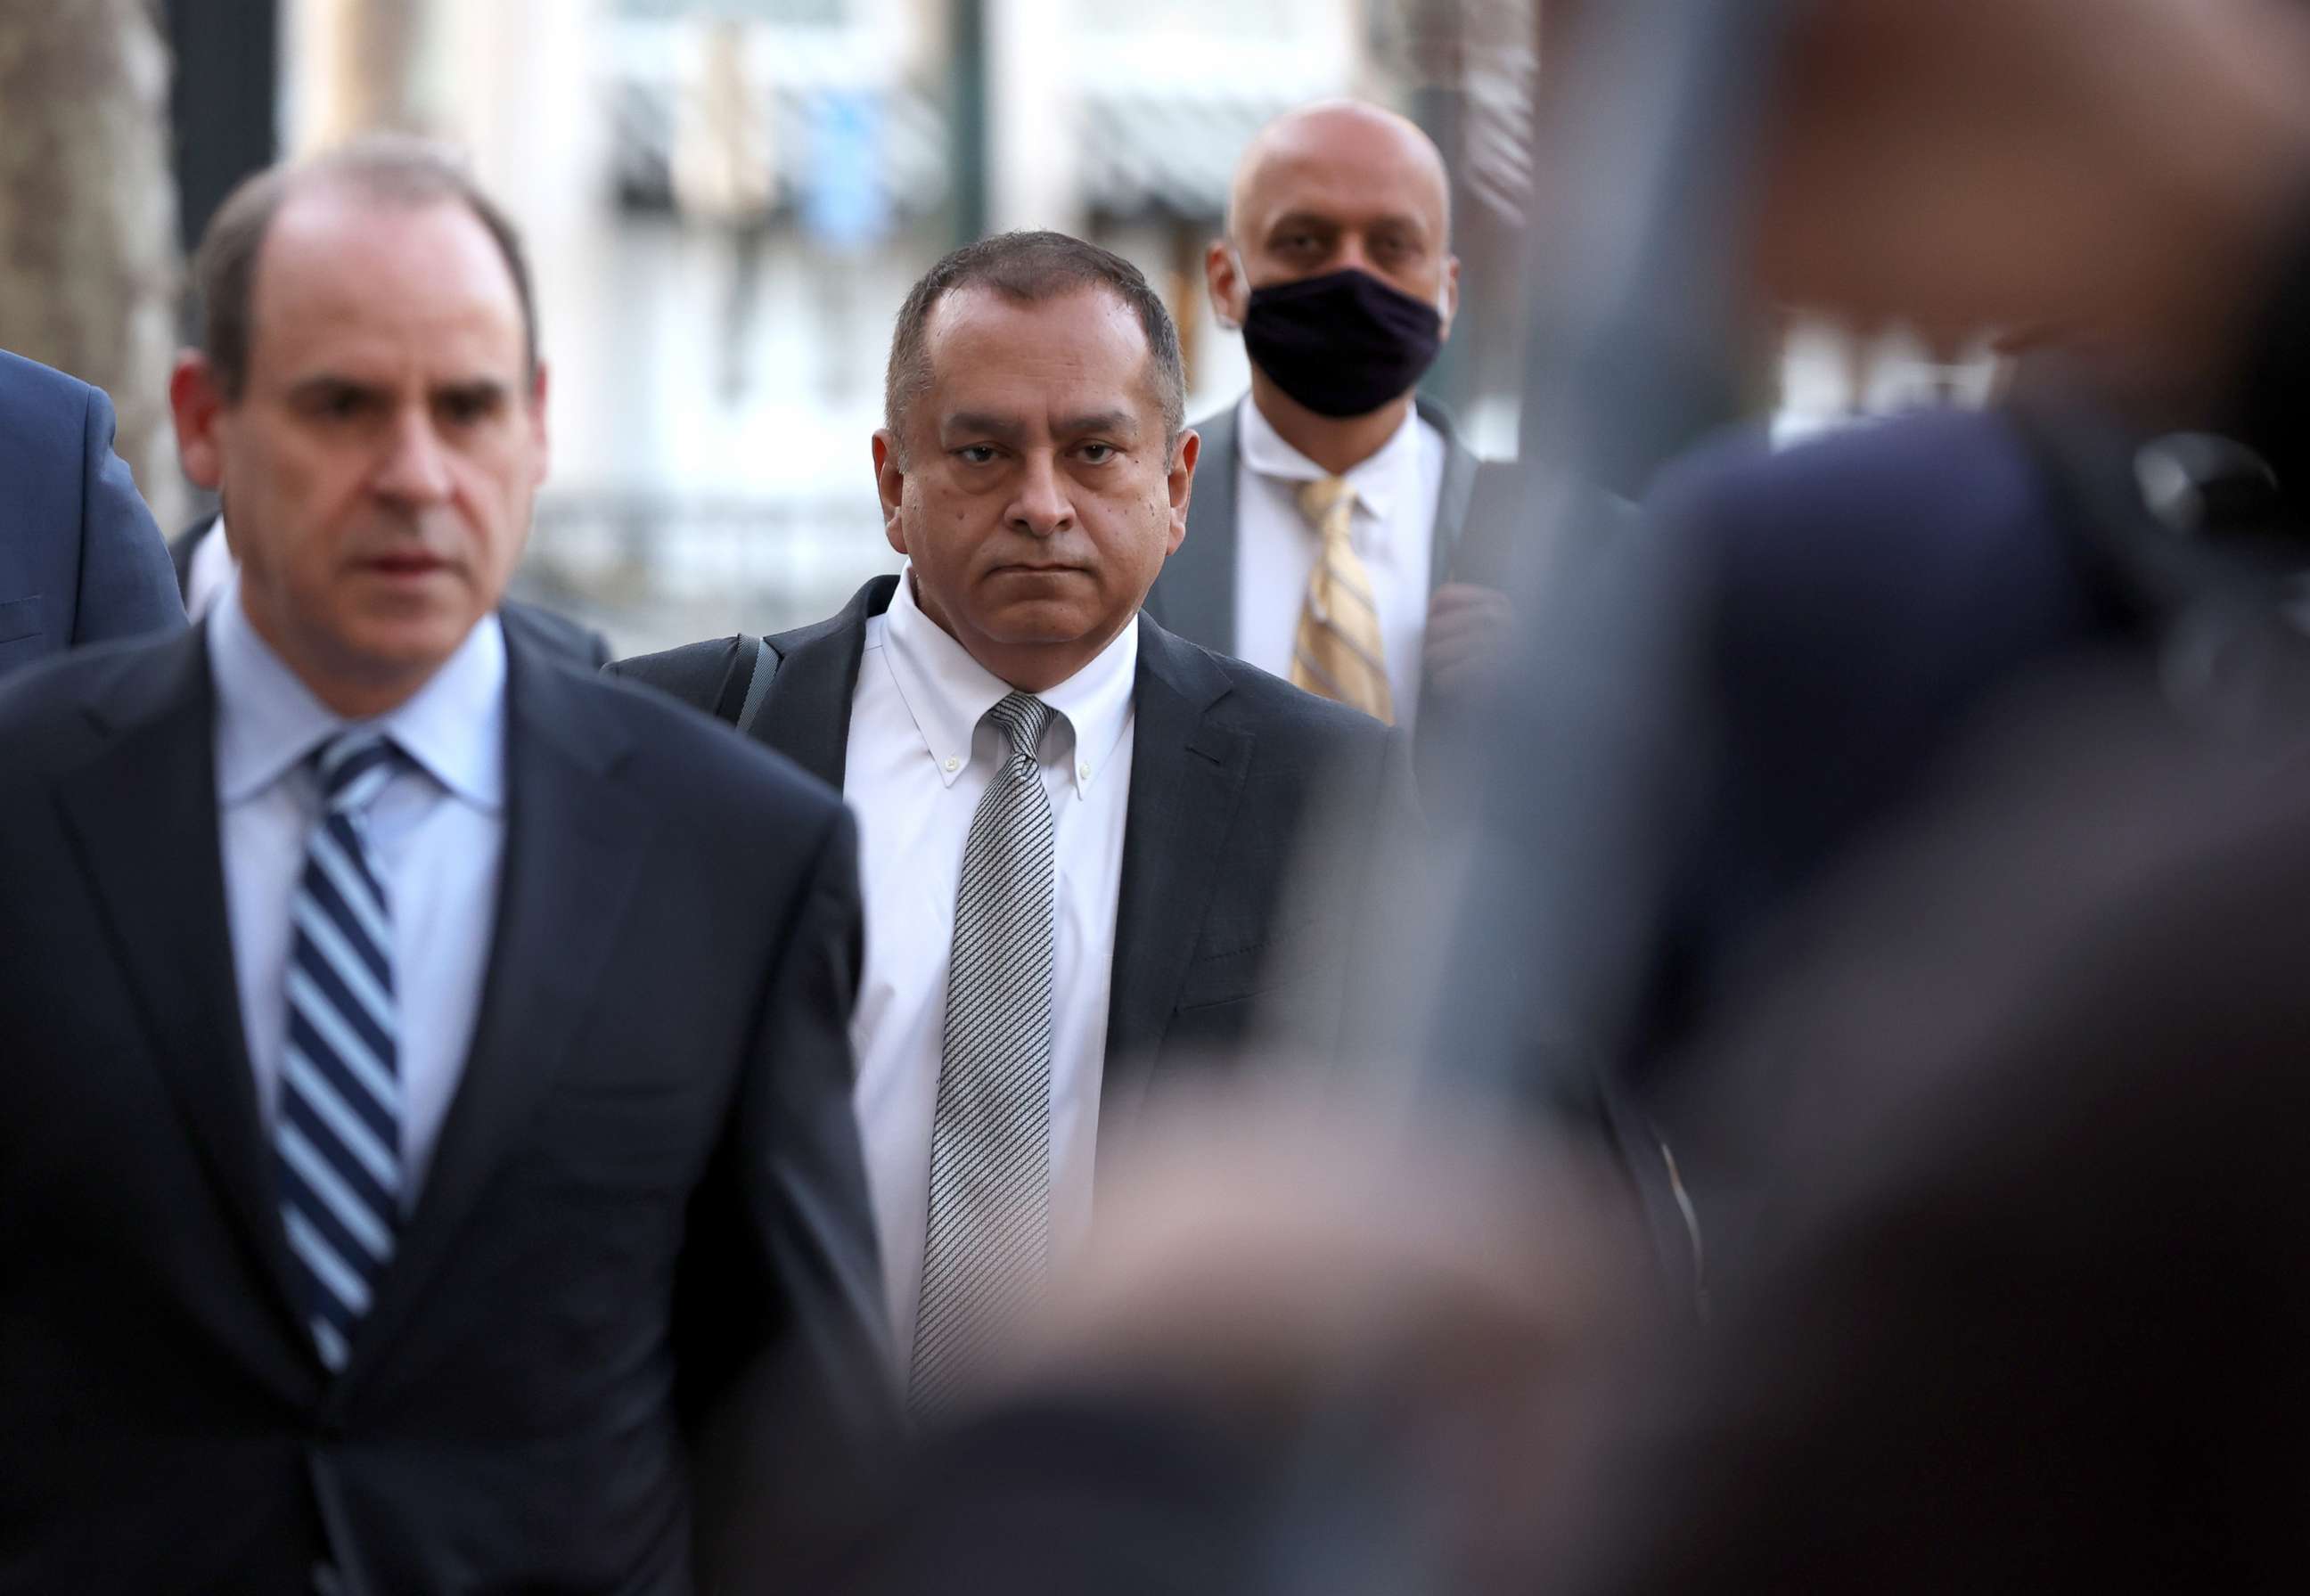 PHOTO: Former Theranos COO Ramesh "Sunny" Balwani (C) arrives at the Robert F. Peckham U.S. Federal Court with his legal team, March 16, 2022, in San Jose, Calif. 